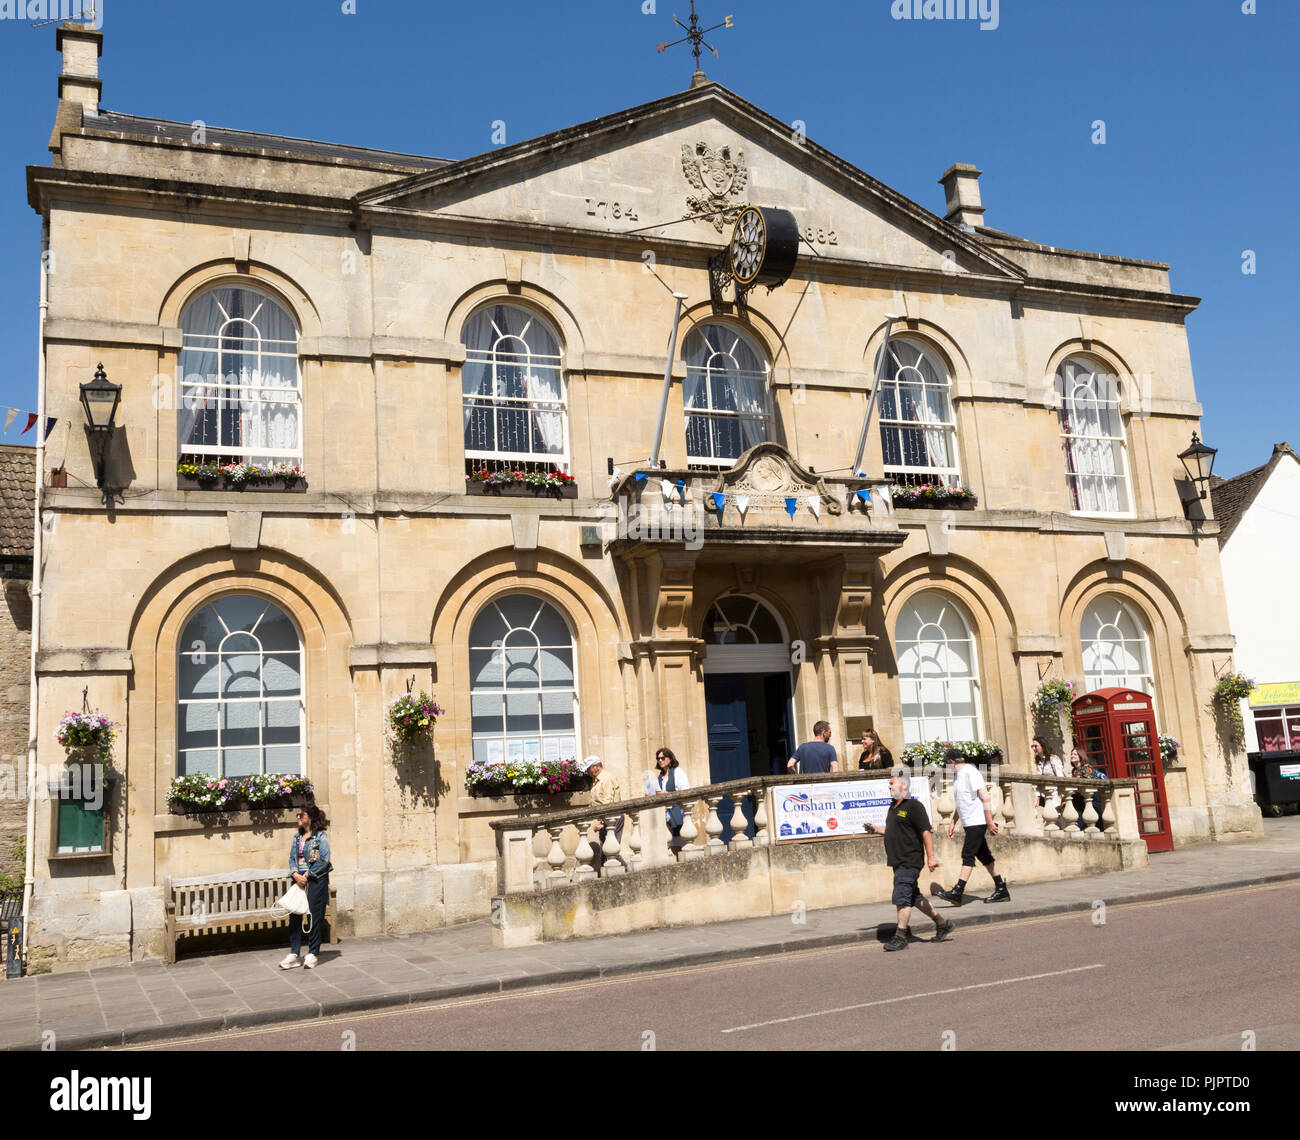 Georgian architecture of Town Hall building, Corsham, Wiltshire, England, UK dating from 1784 Stock Photo